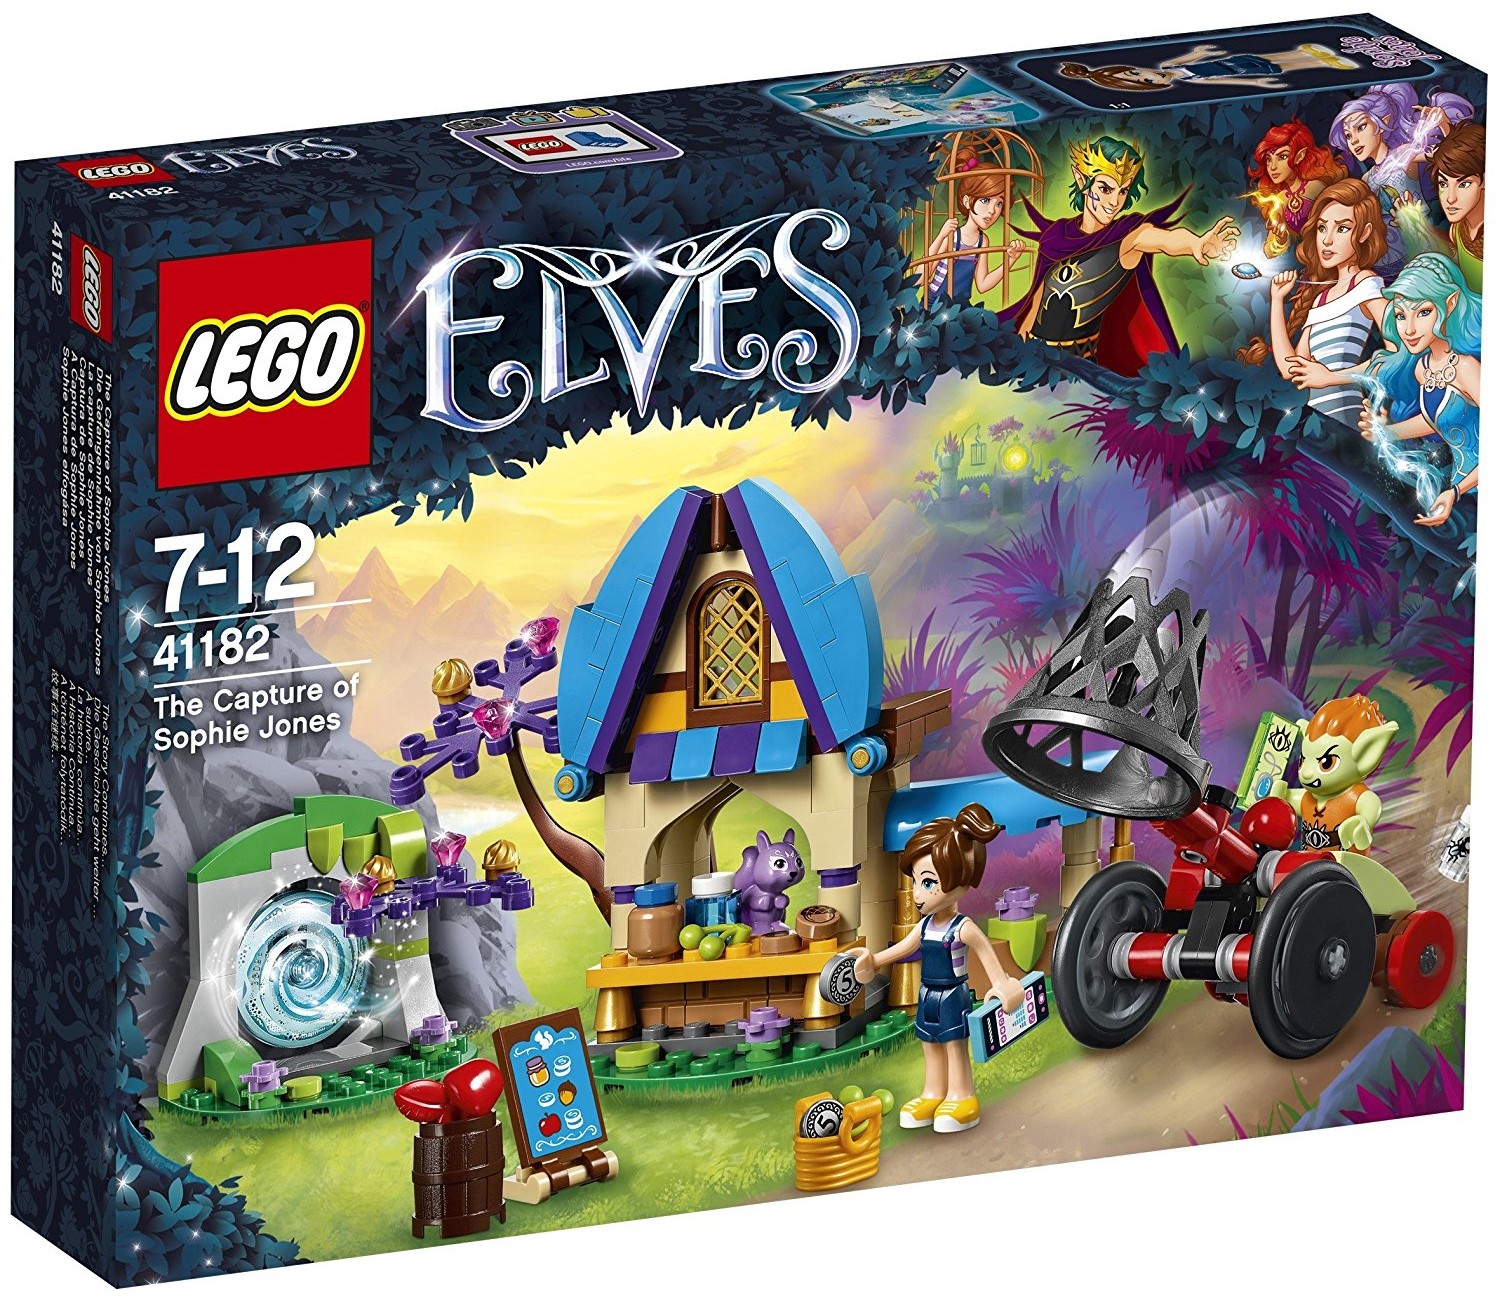 LEGO ELVES  new nuovo various packs available choose the one you like 